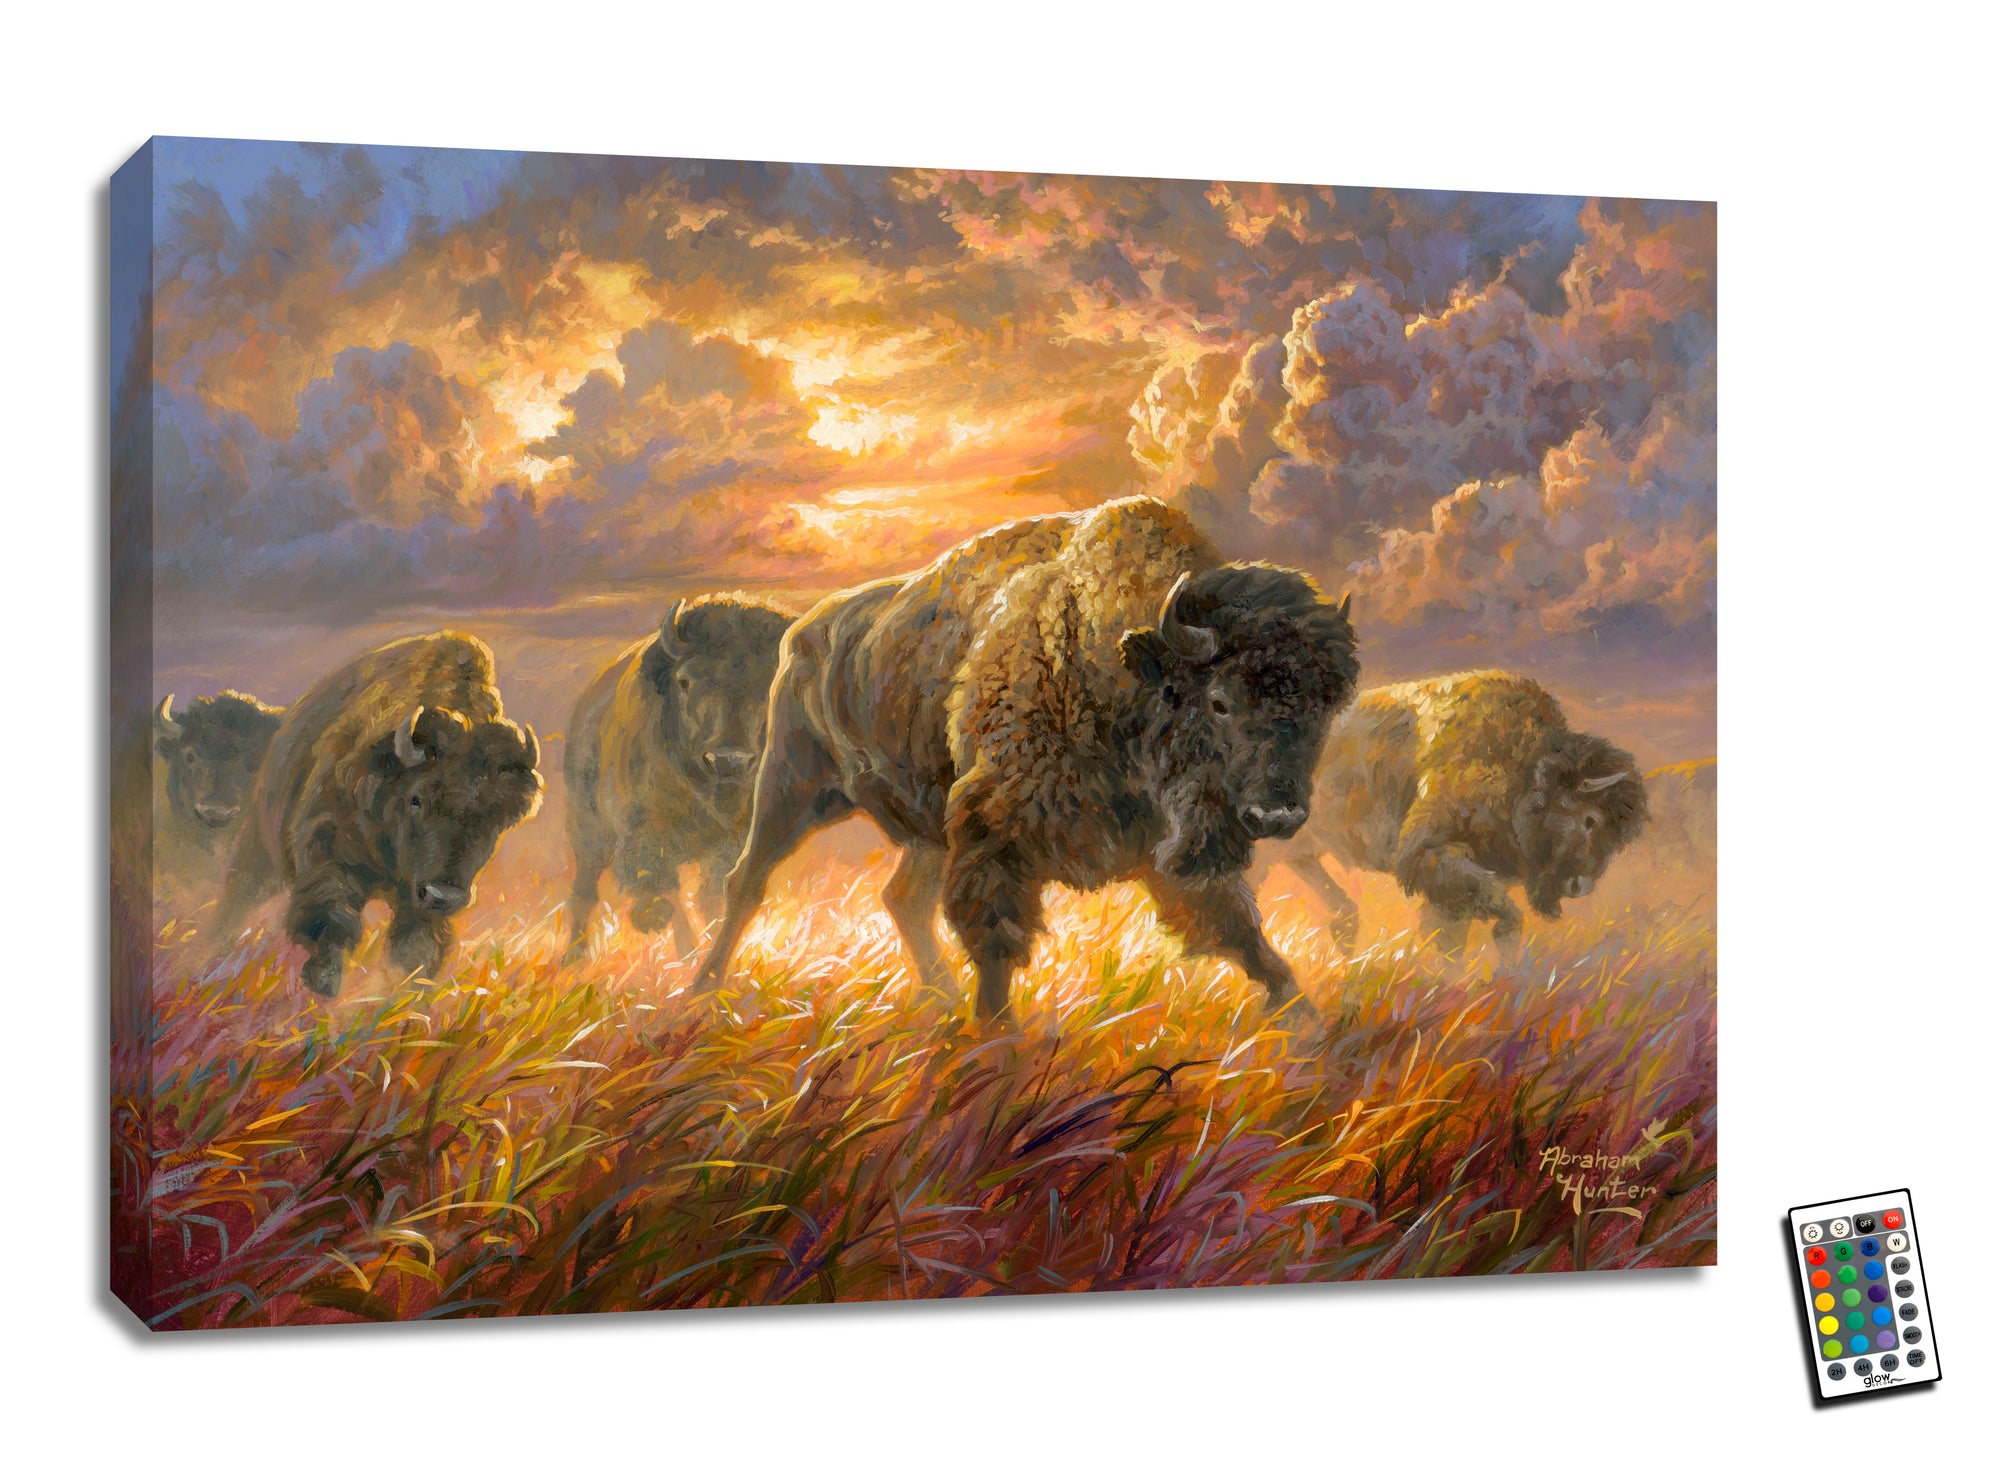 This stunning piece features a large buffalo running through tall grass, surrounded by the golden glow of the sun shining through the clouds above.  The fully illuminated LED lights add a touch of magic, bringing the scene to life with a warm and inviting ambiance.